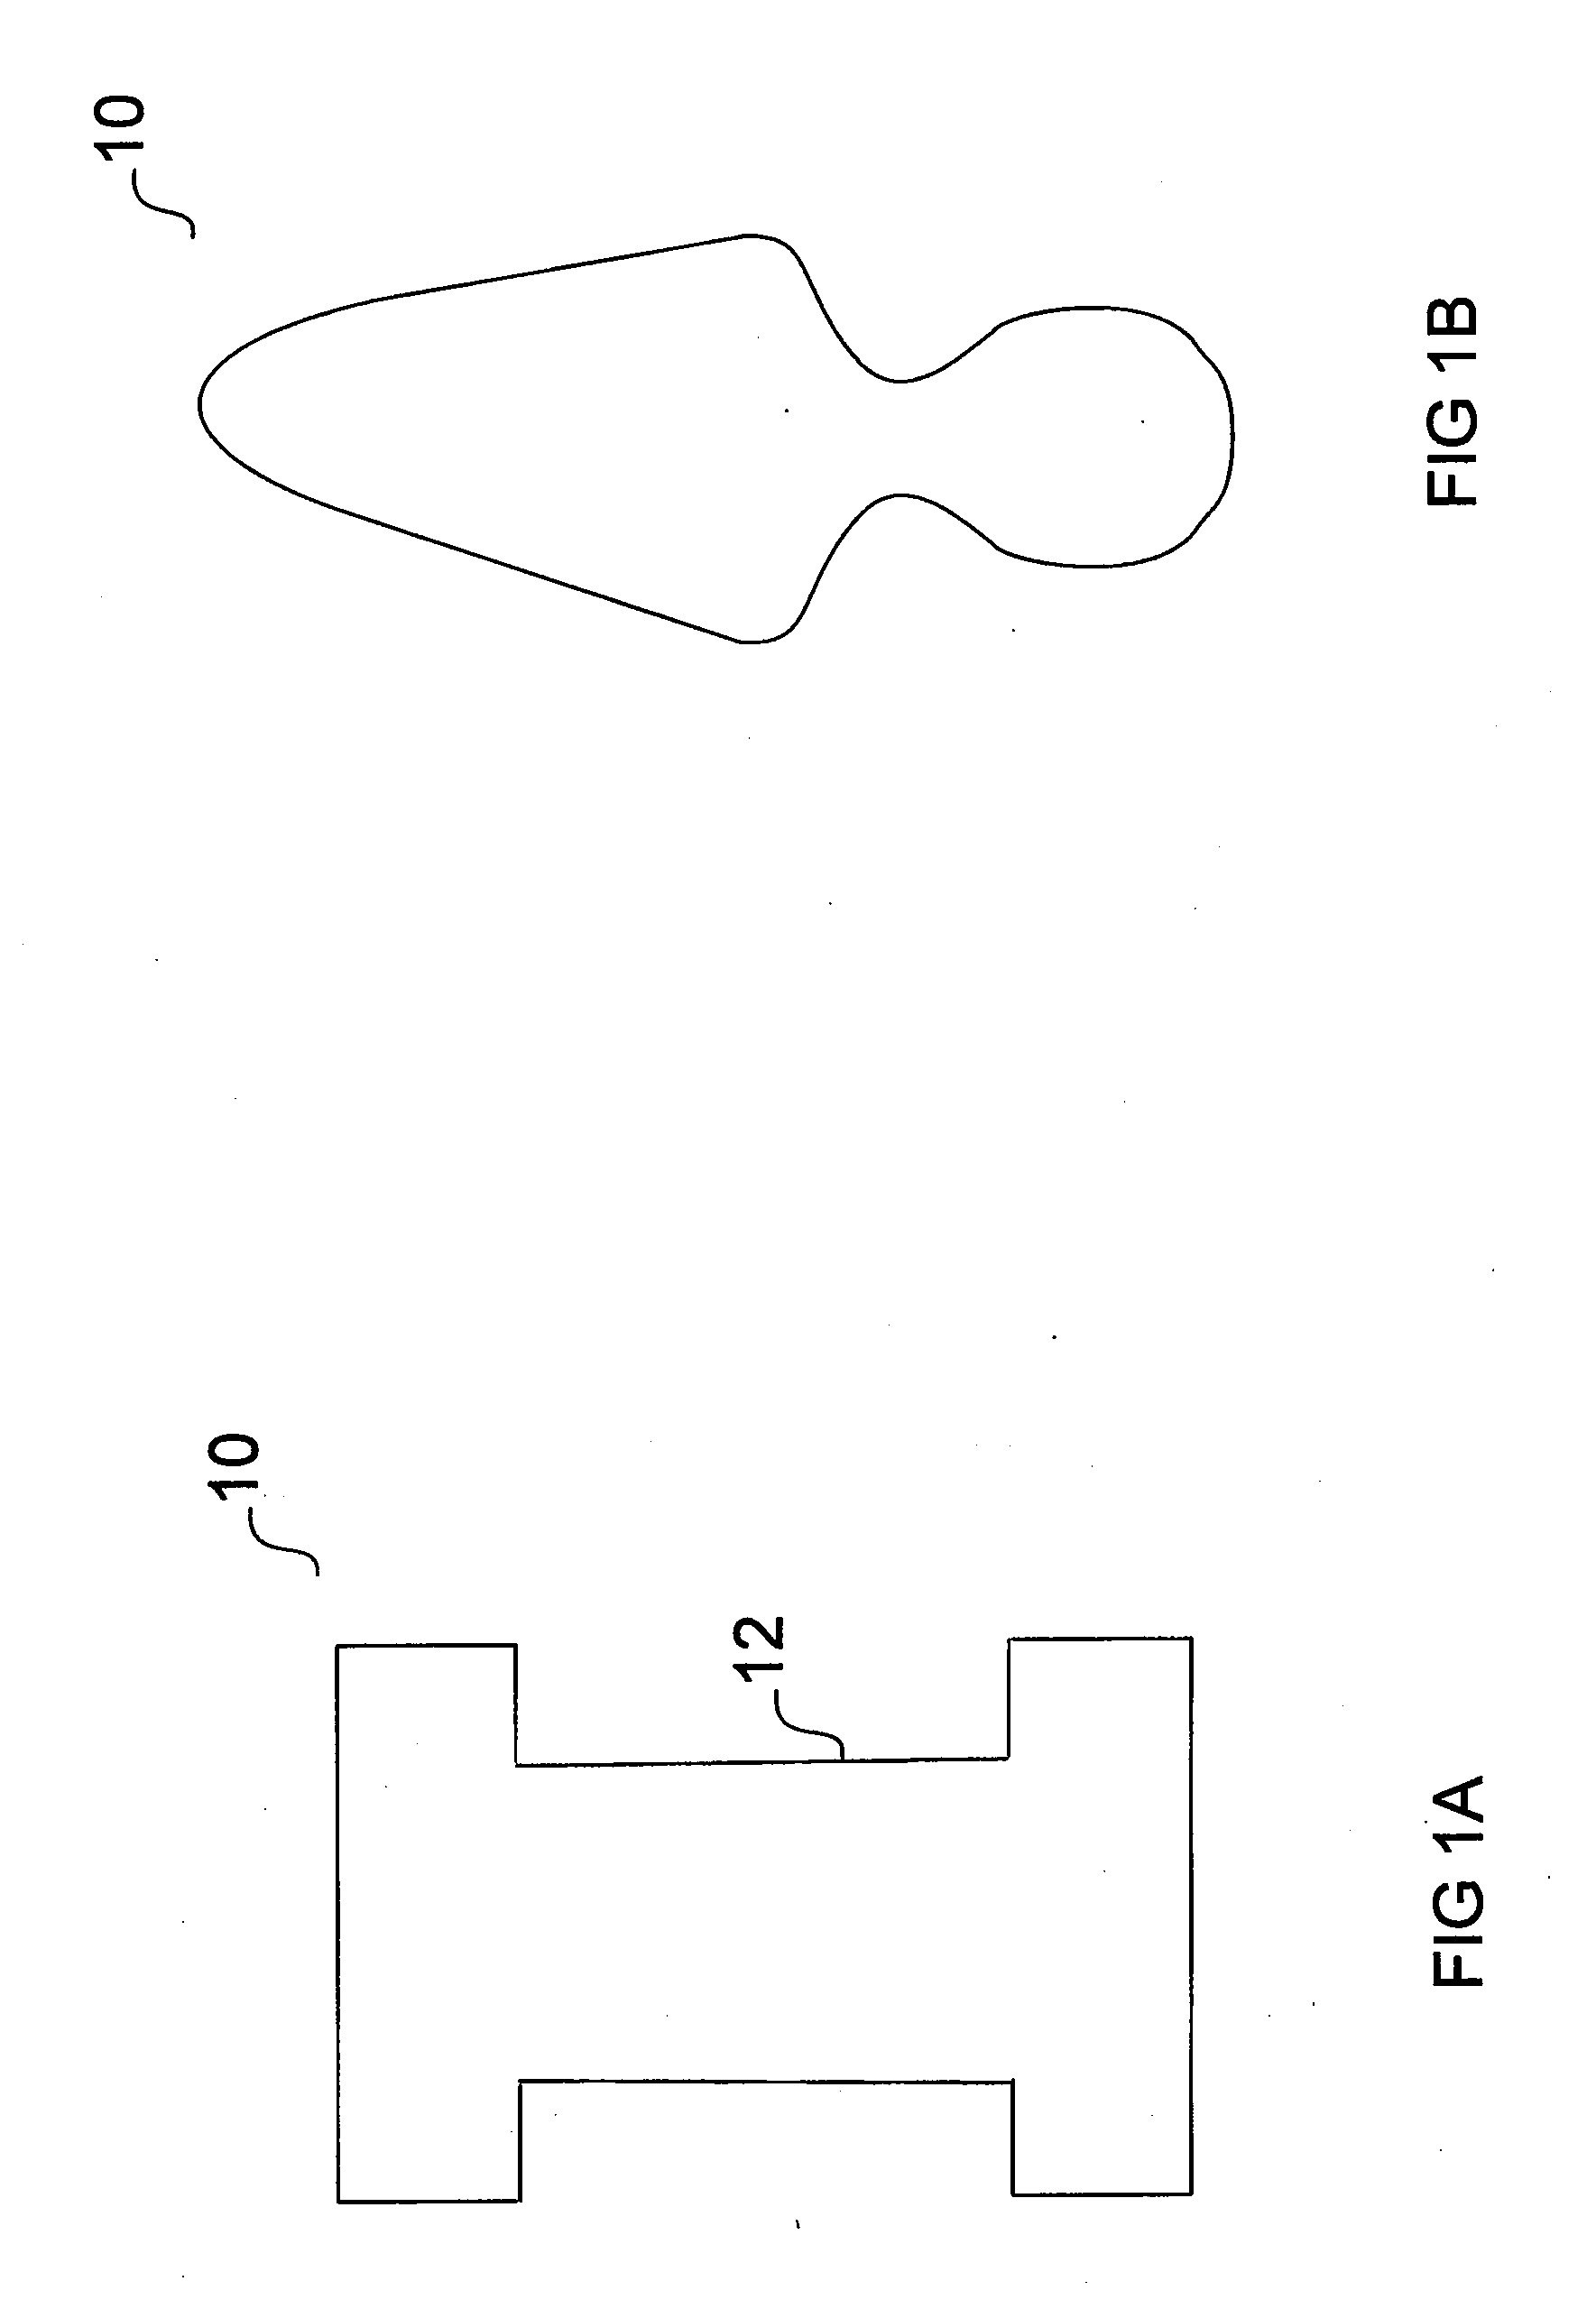 System and method for providing medicinal treatment